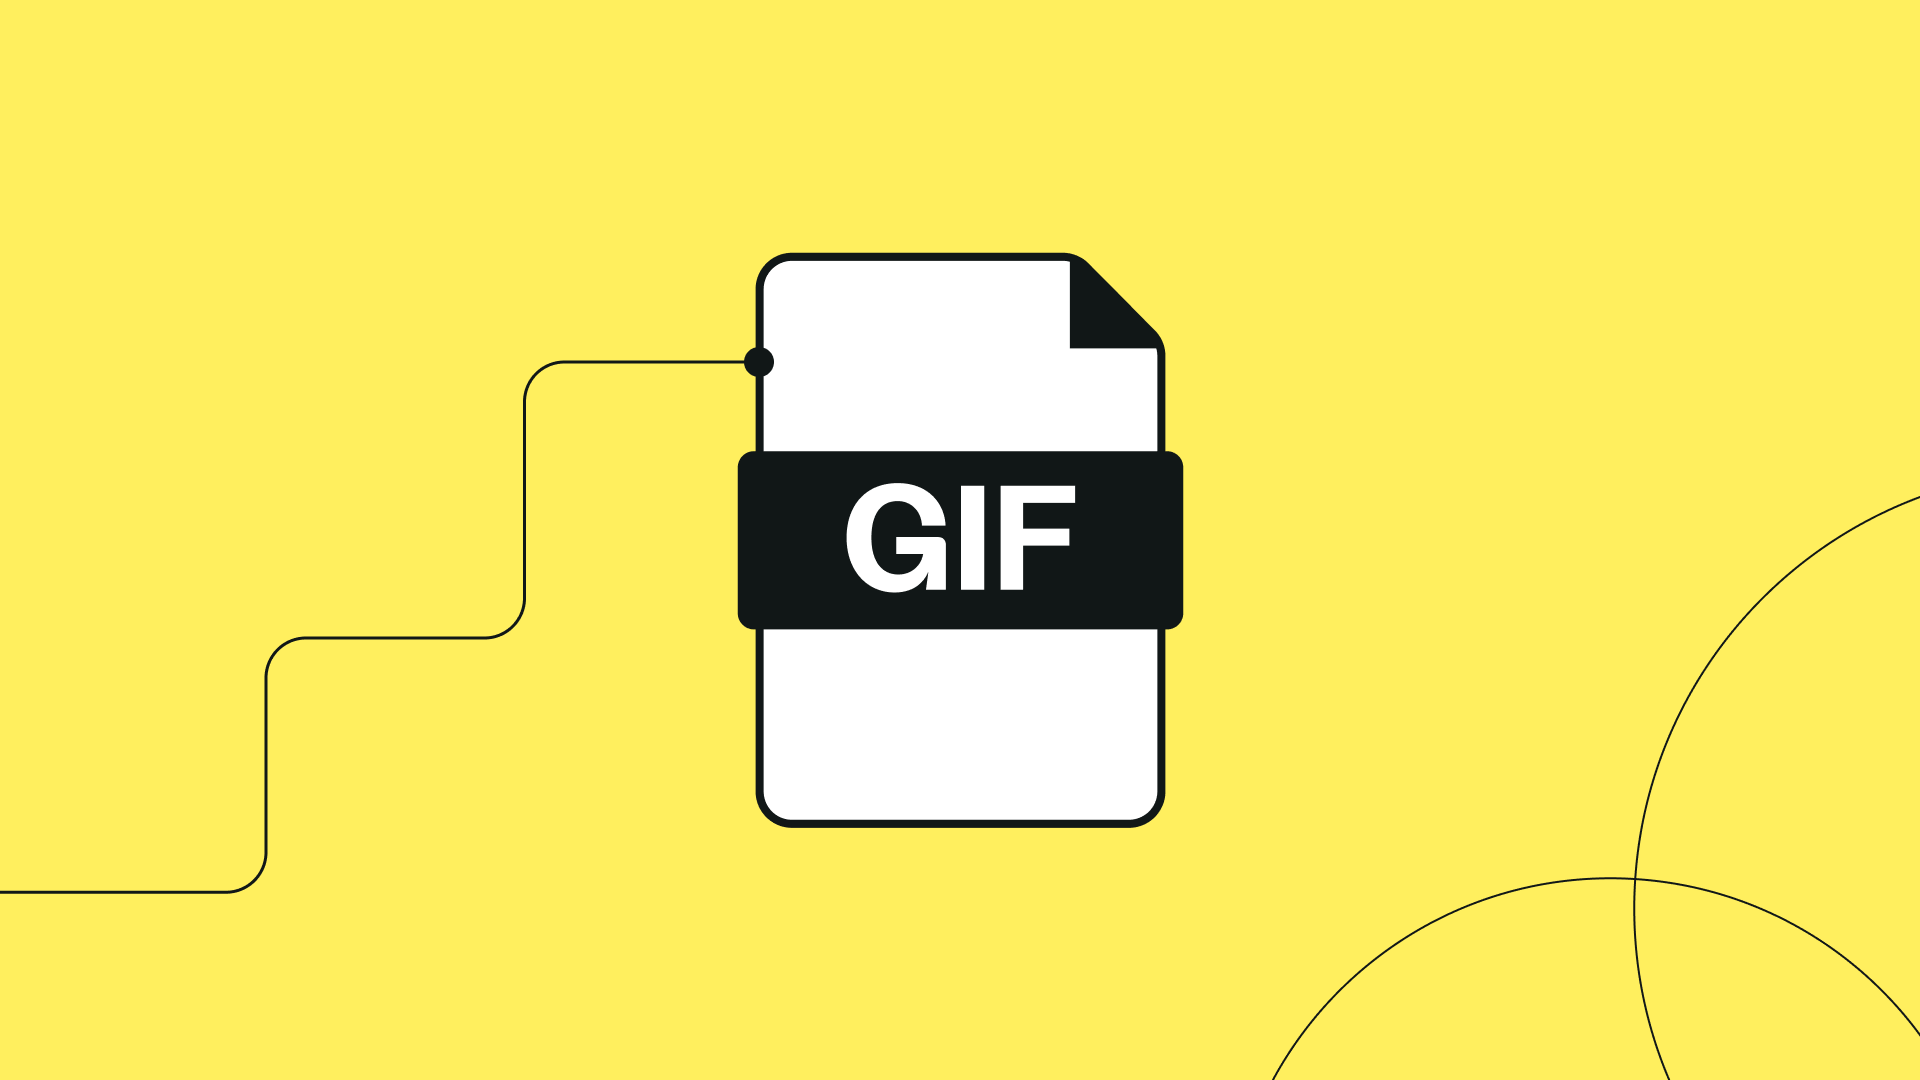 How to create your own GIFs | Linearity